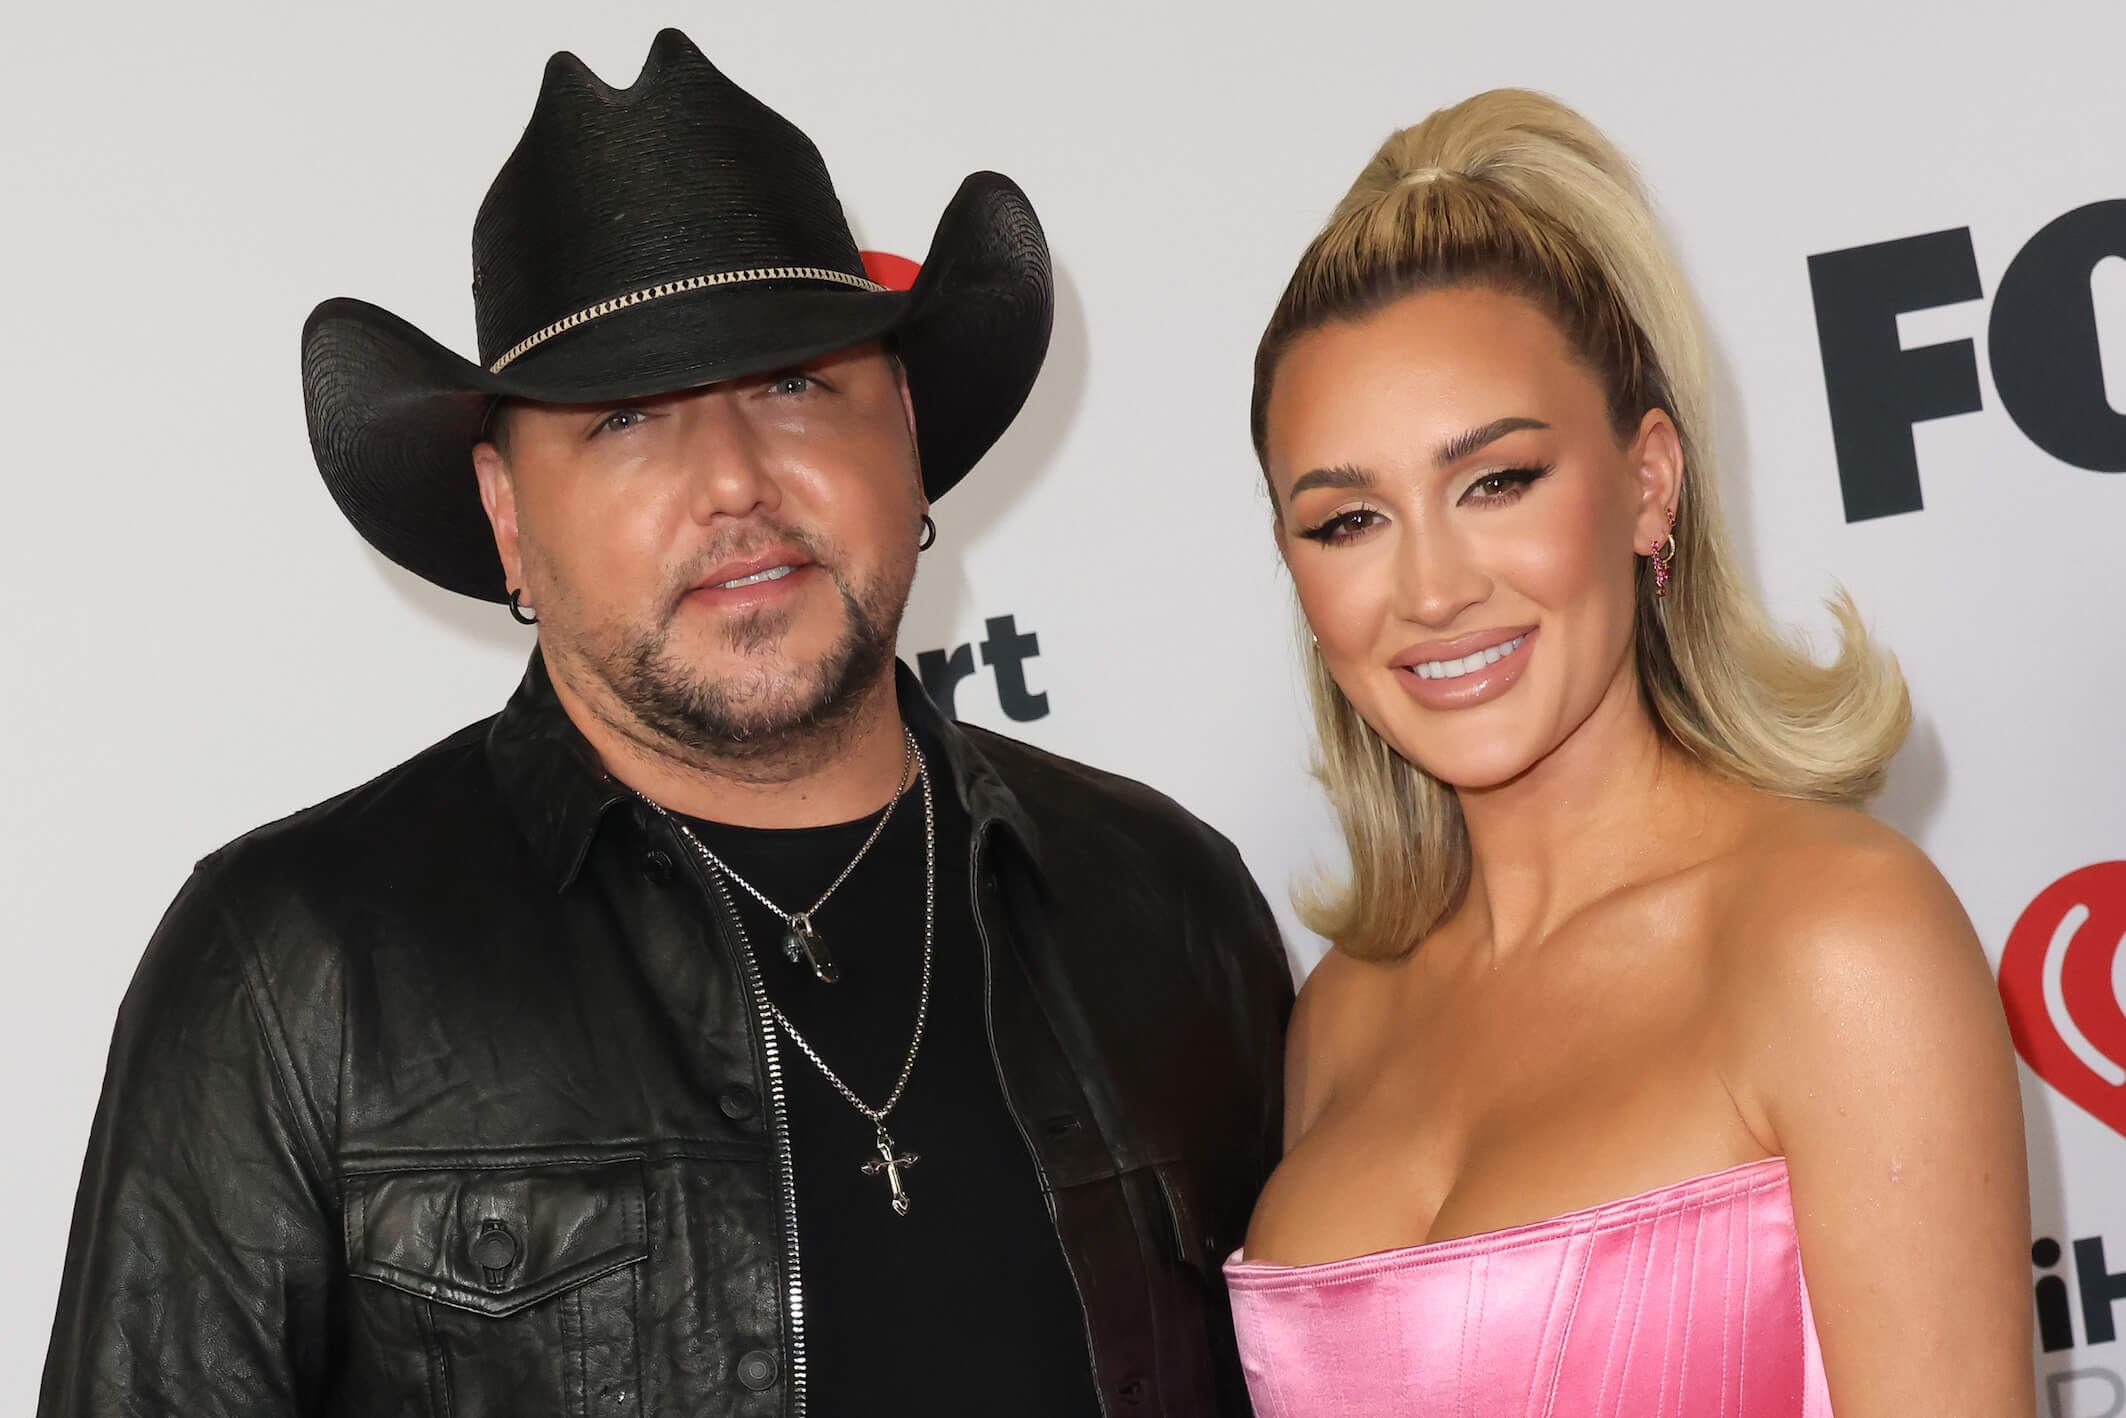 Jason Aldean and his wife, Brittany Aldean, standing next to each other at an event